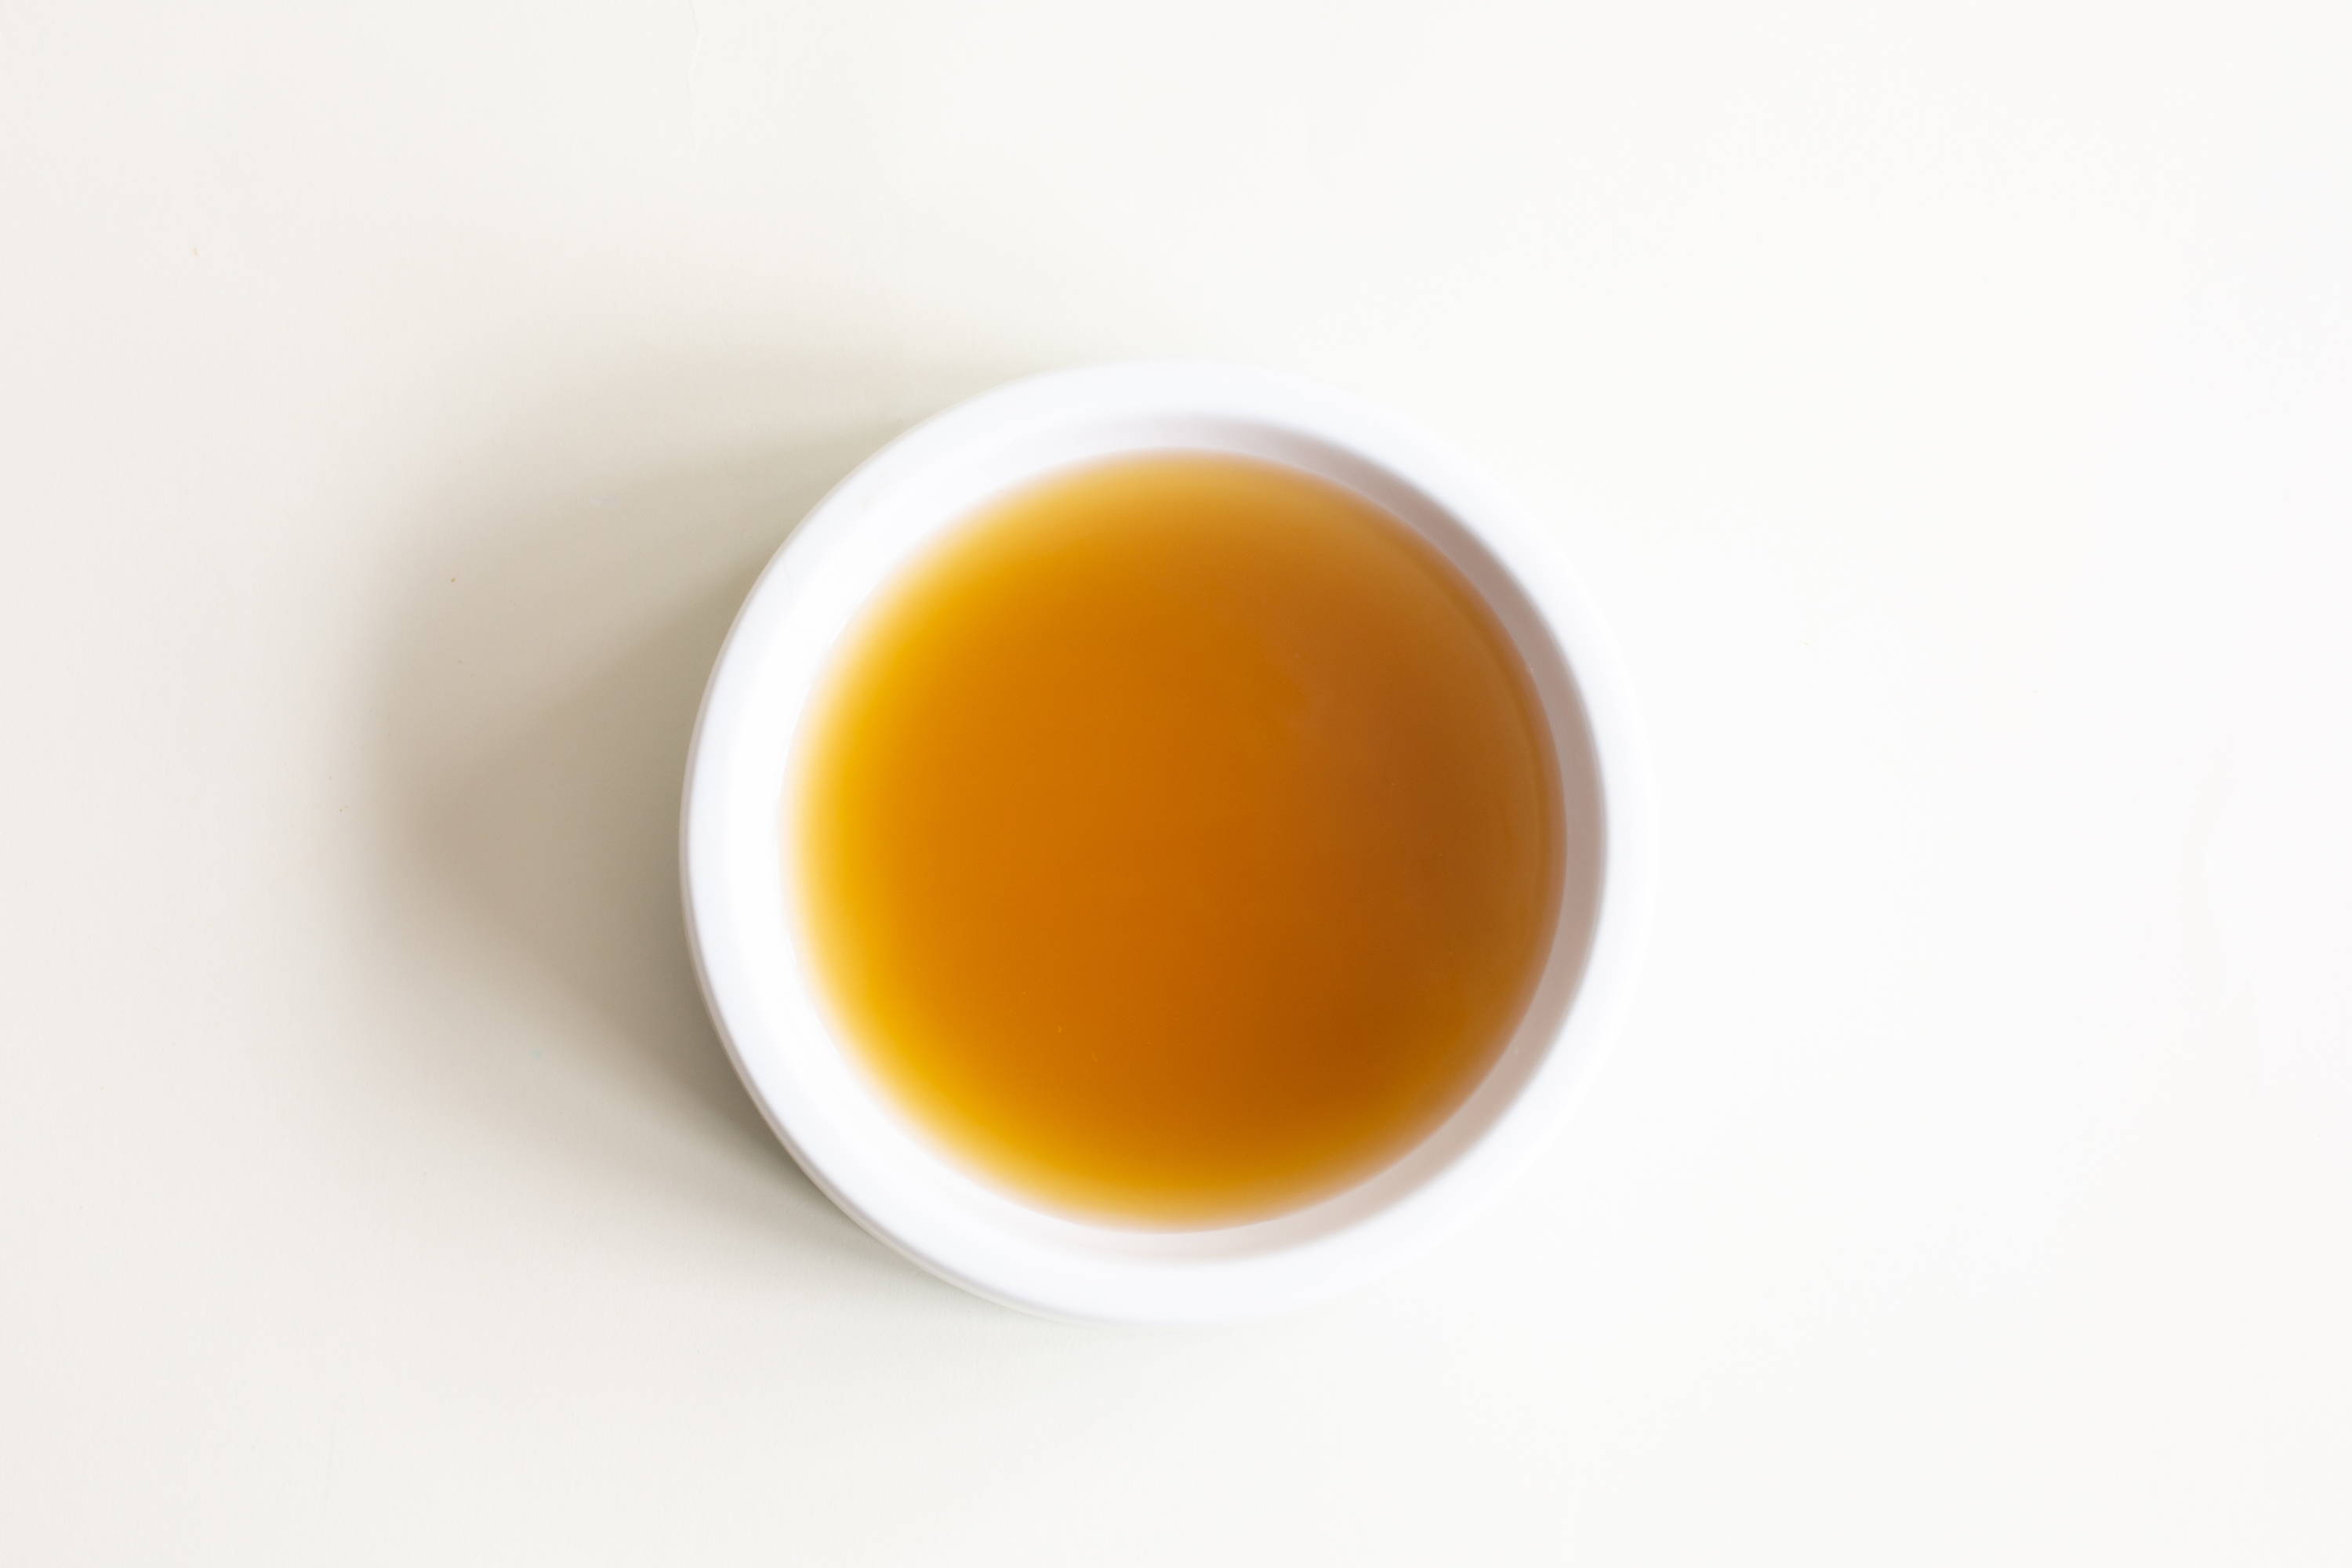 an image of a white bowl full of bone broth which is a hydrator